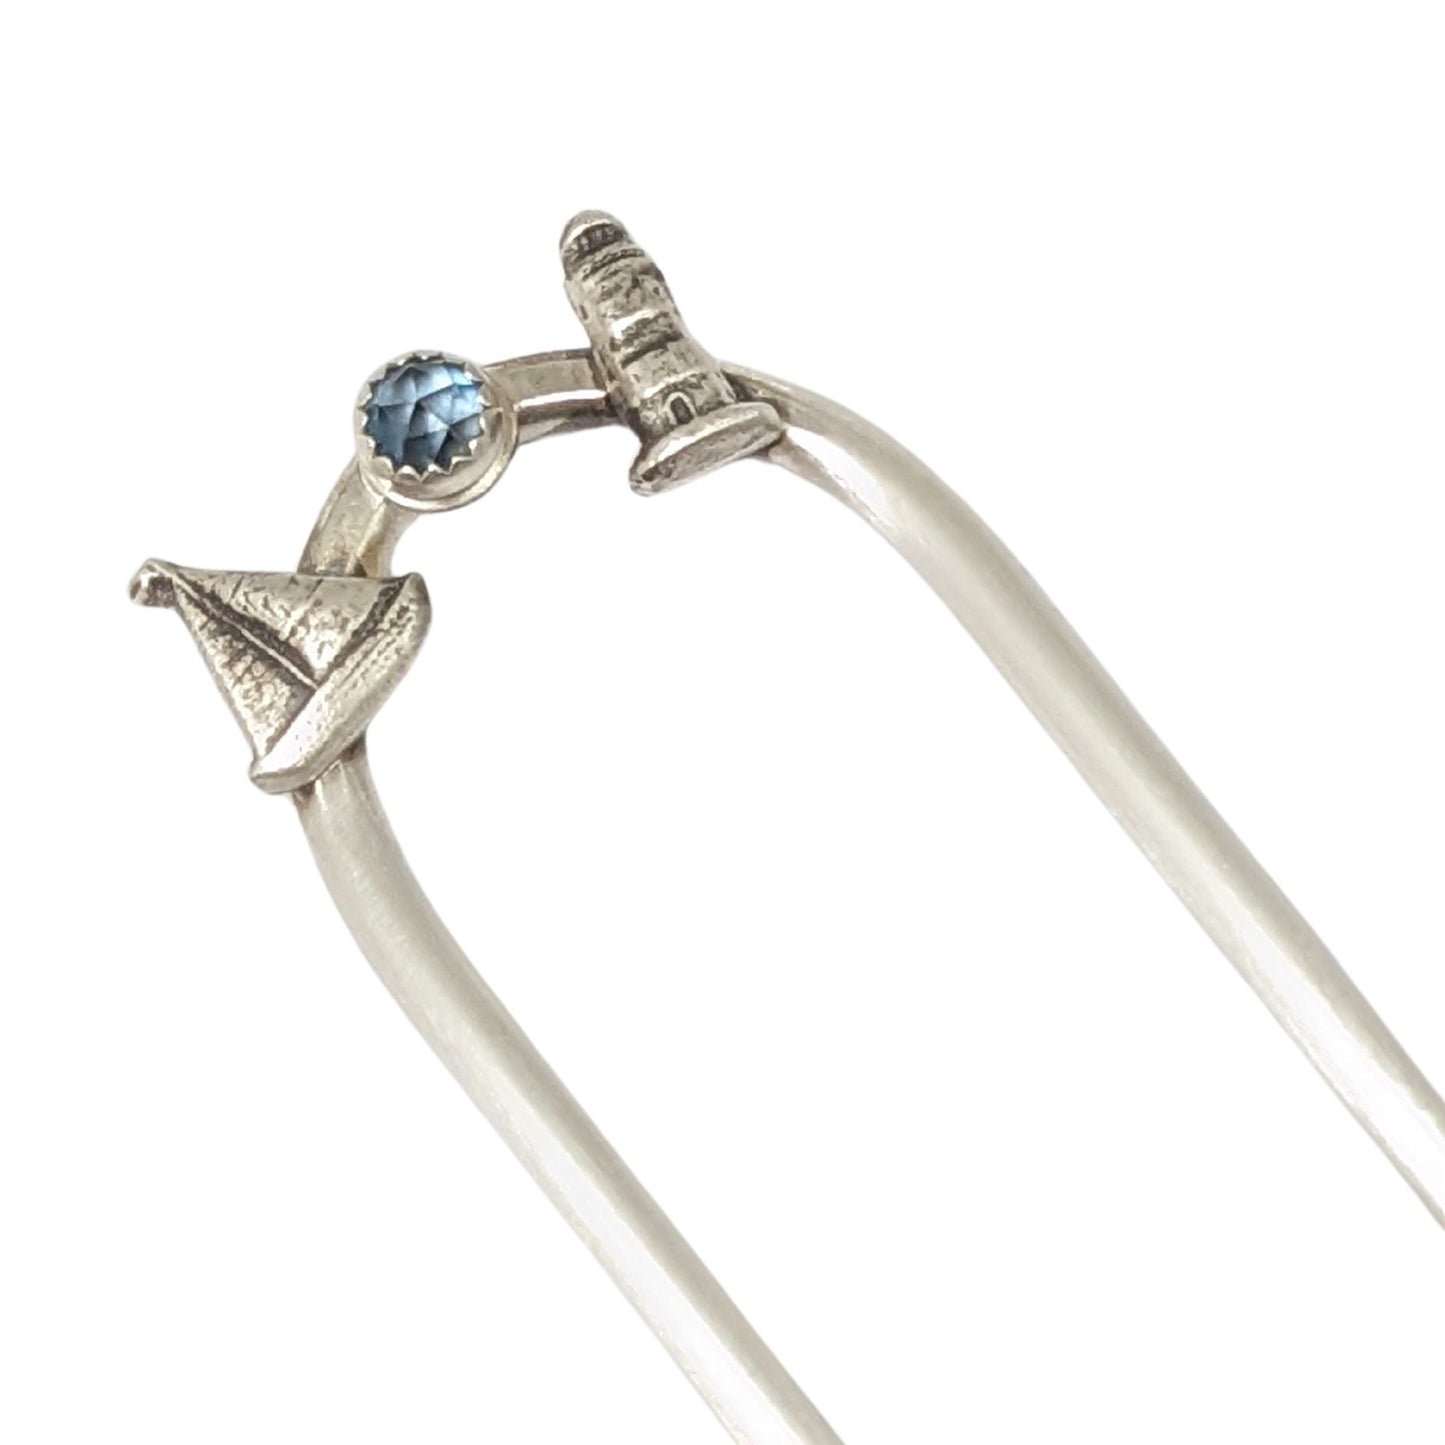 Sterling silver hair fork with three small design elements. Left is a silver sailboat, center is a rose cut blue topaz gemstone, right is a silver lighthouse